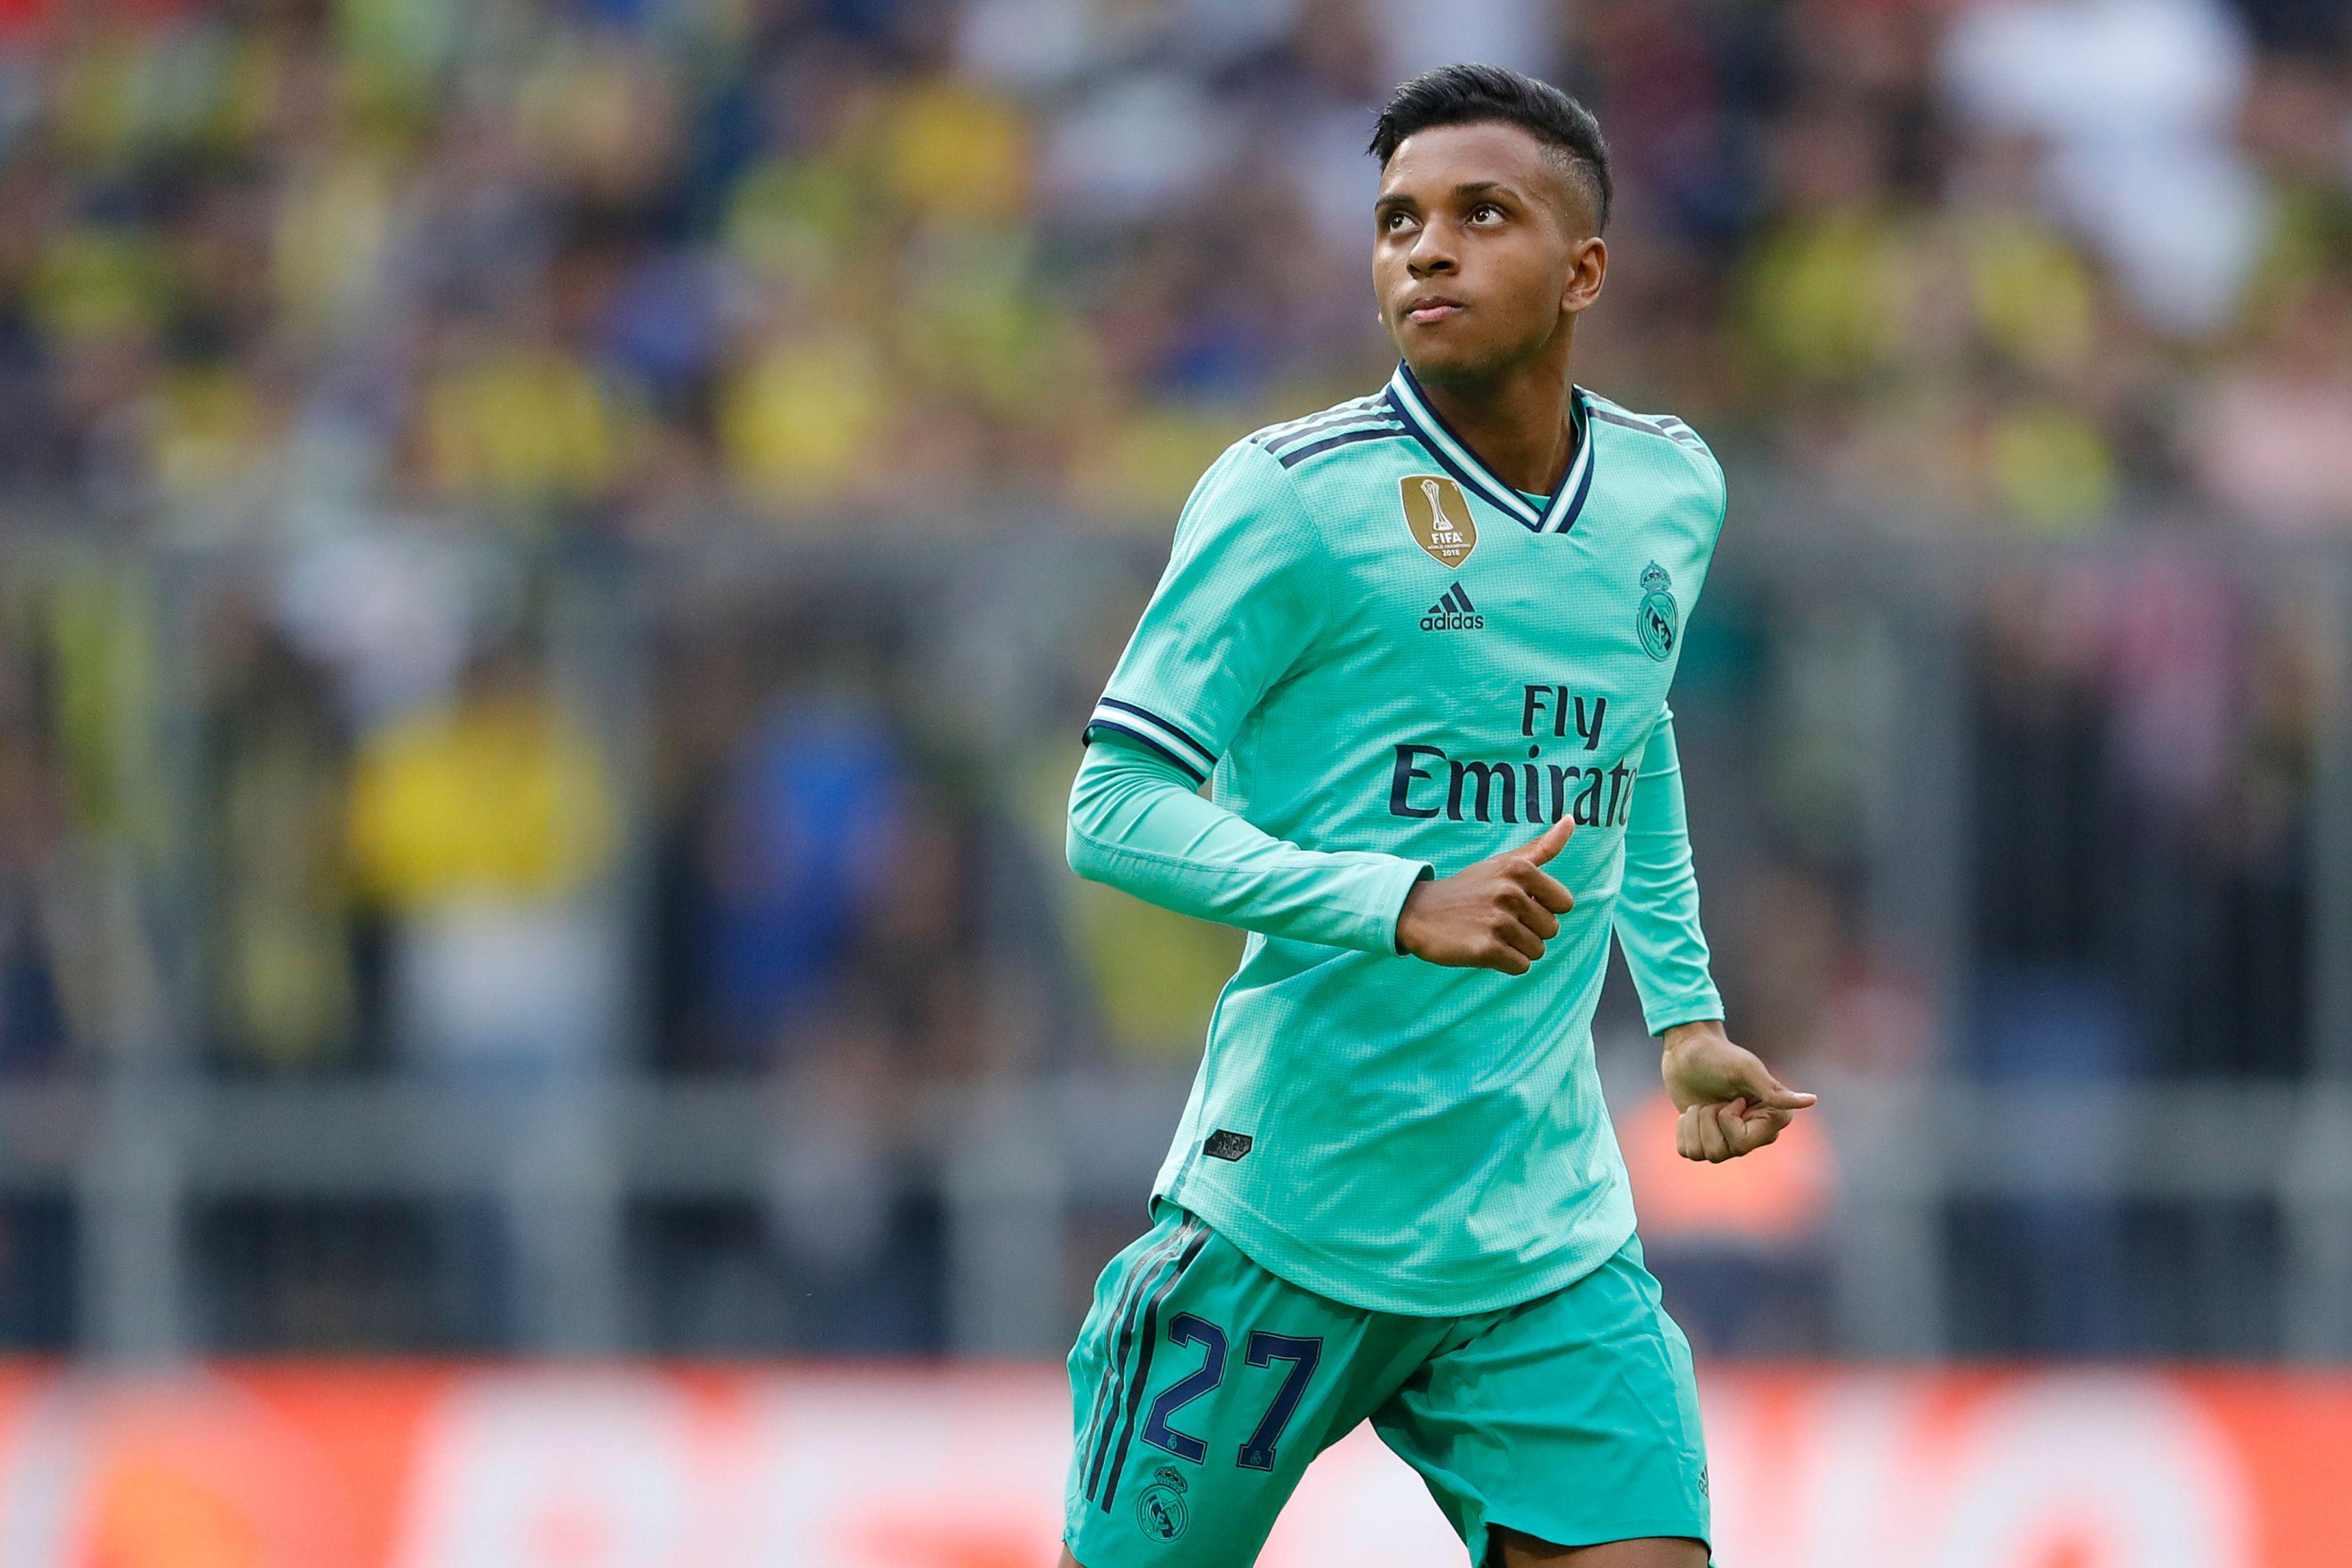 Rodrygo scored an absolute dream goal in his Real Madrid